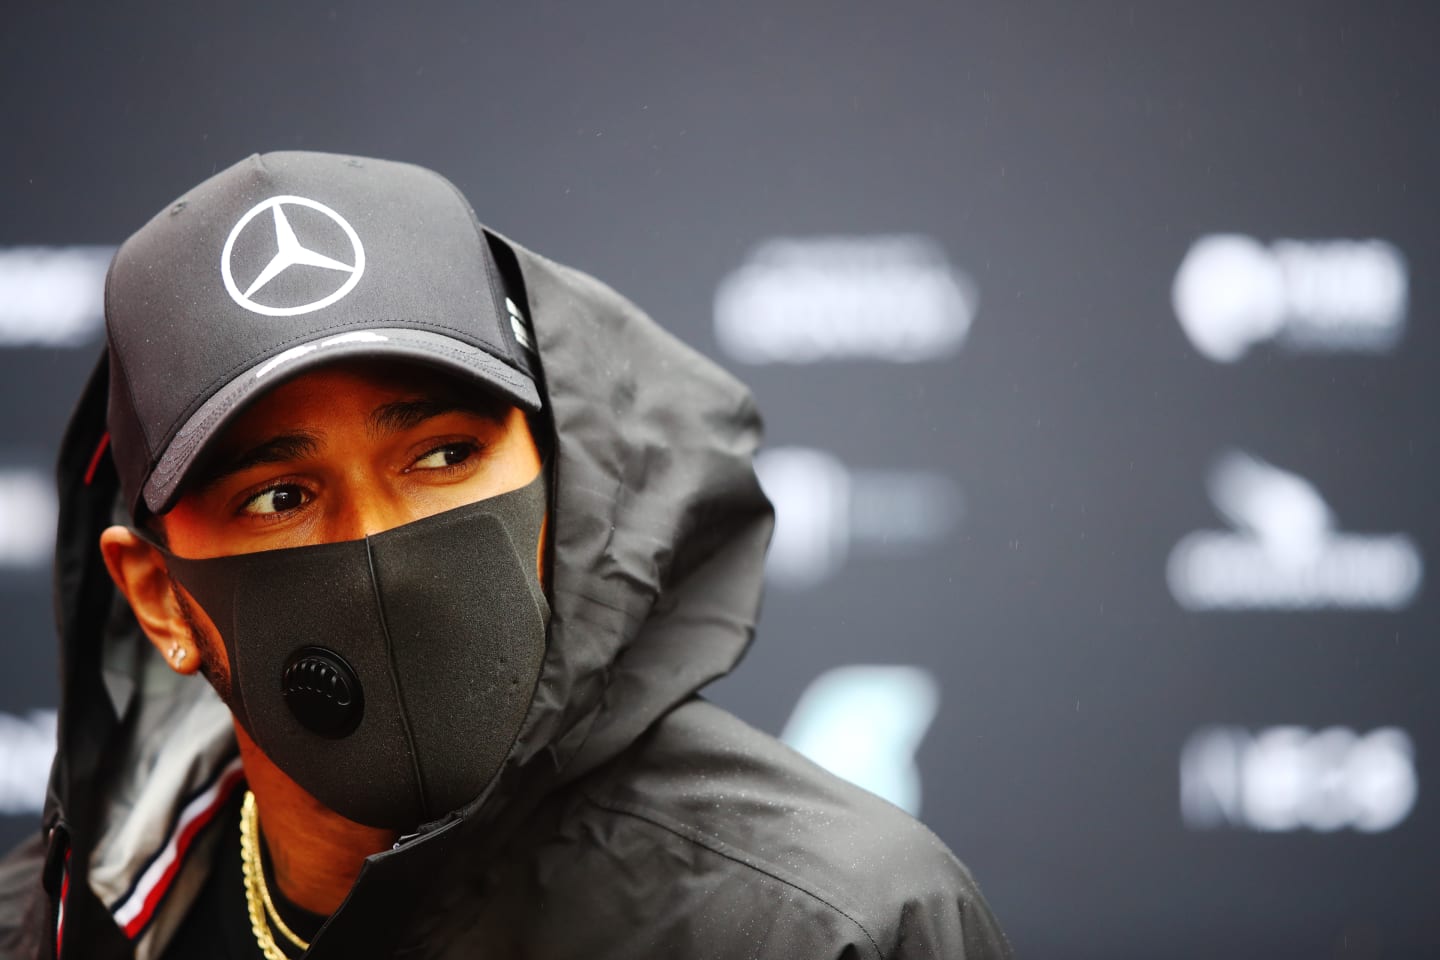 NUERBURG, GERMANY - OCTOBER 08: Lewis Hamilton of Great Britain and Mercedes GP looks on in the Paddock during previews ahead of the F1 Eifel Grand Prix at Nuerburgring on October 08, 2020 in Nuerburg, Germany. (Photo by Mark Thompson/Getty Images)